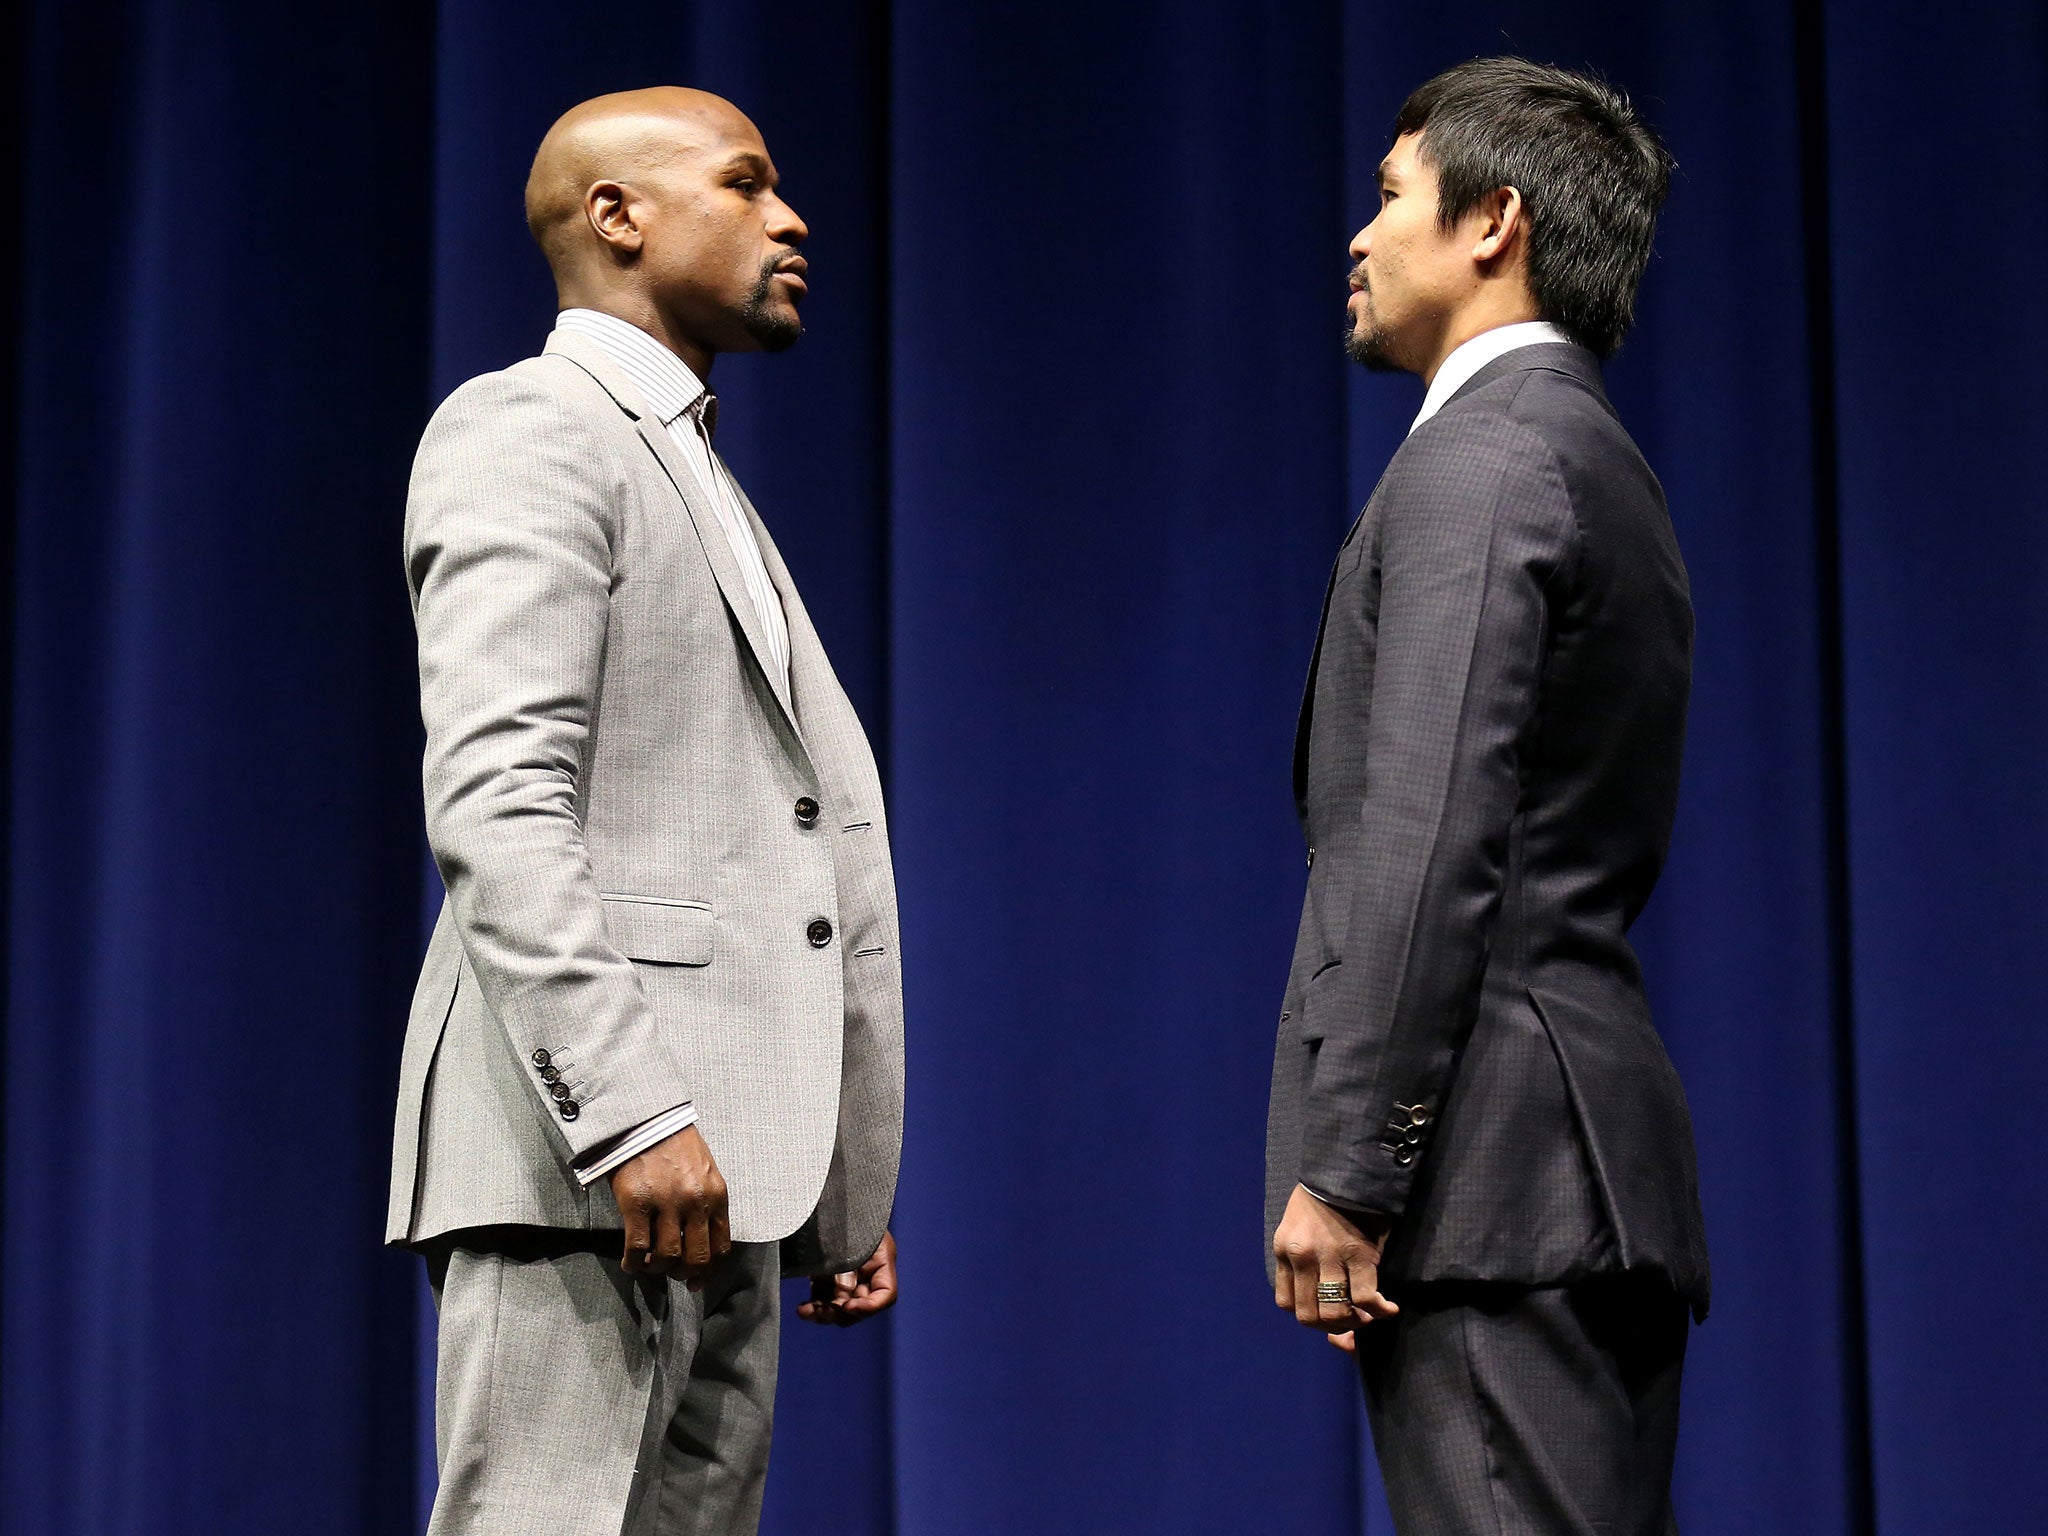 Floyd Mayweather and Manny Pacquiao go head-to-head